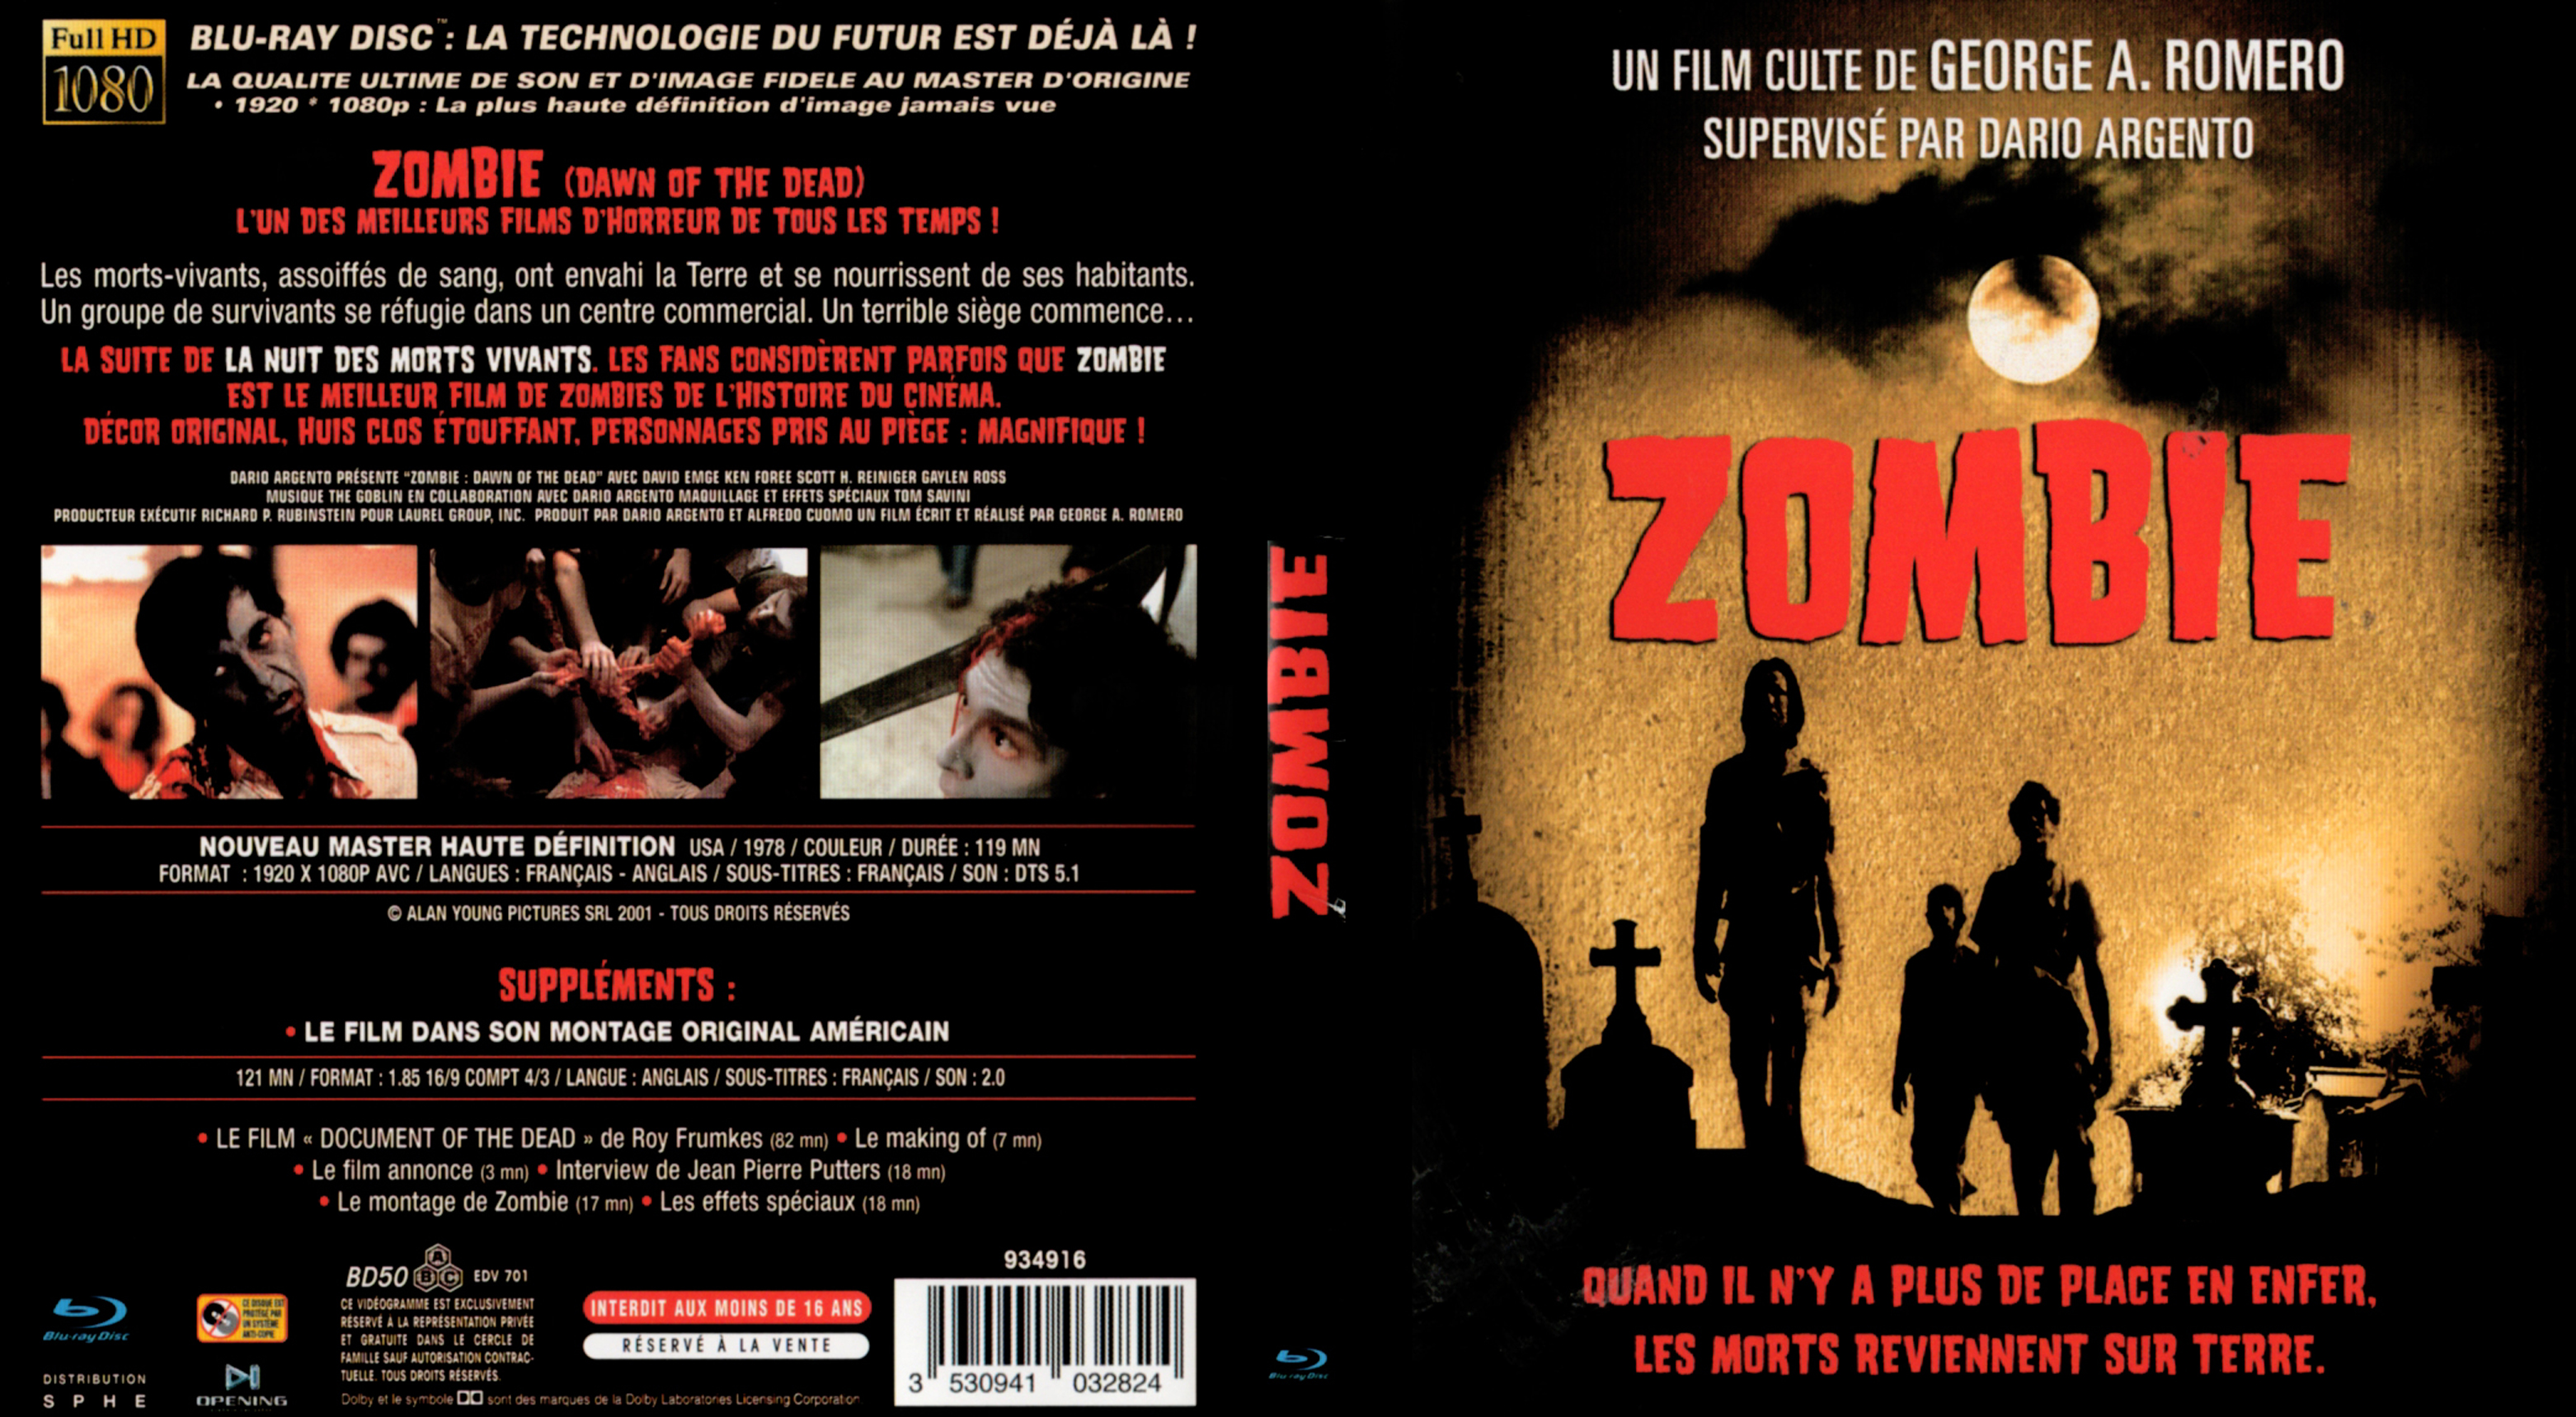 Jaquette DVD Zombie (BLU-RAY)